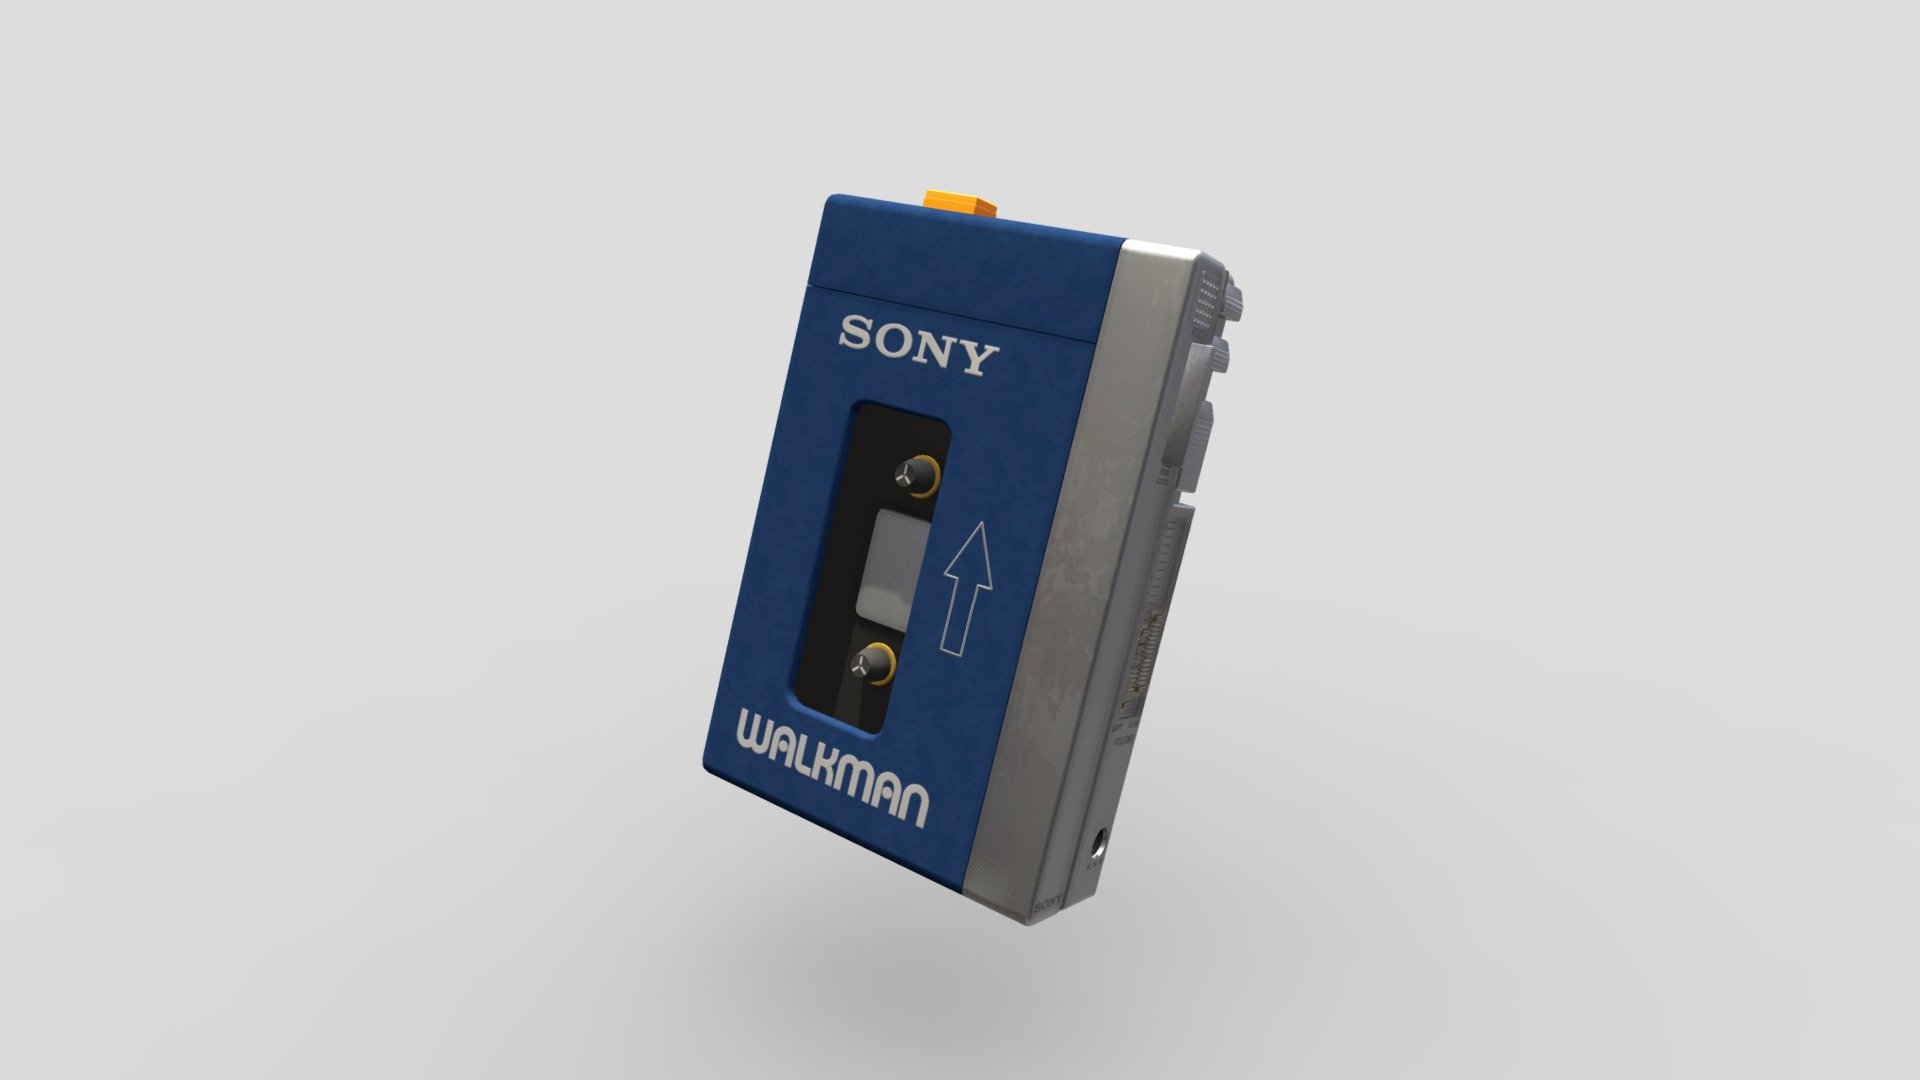 Sony Walkman TPS-L2 modeled by me
textured in Substense painter 
modeled in Blender - Sony Walkman TPS-L2 - 3D model by Asher (@Asher445) 3d model